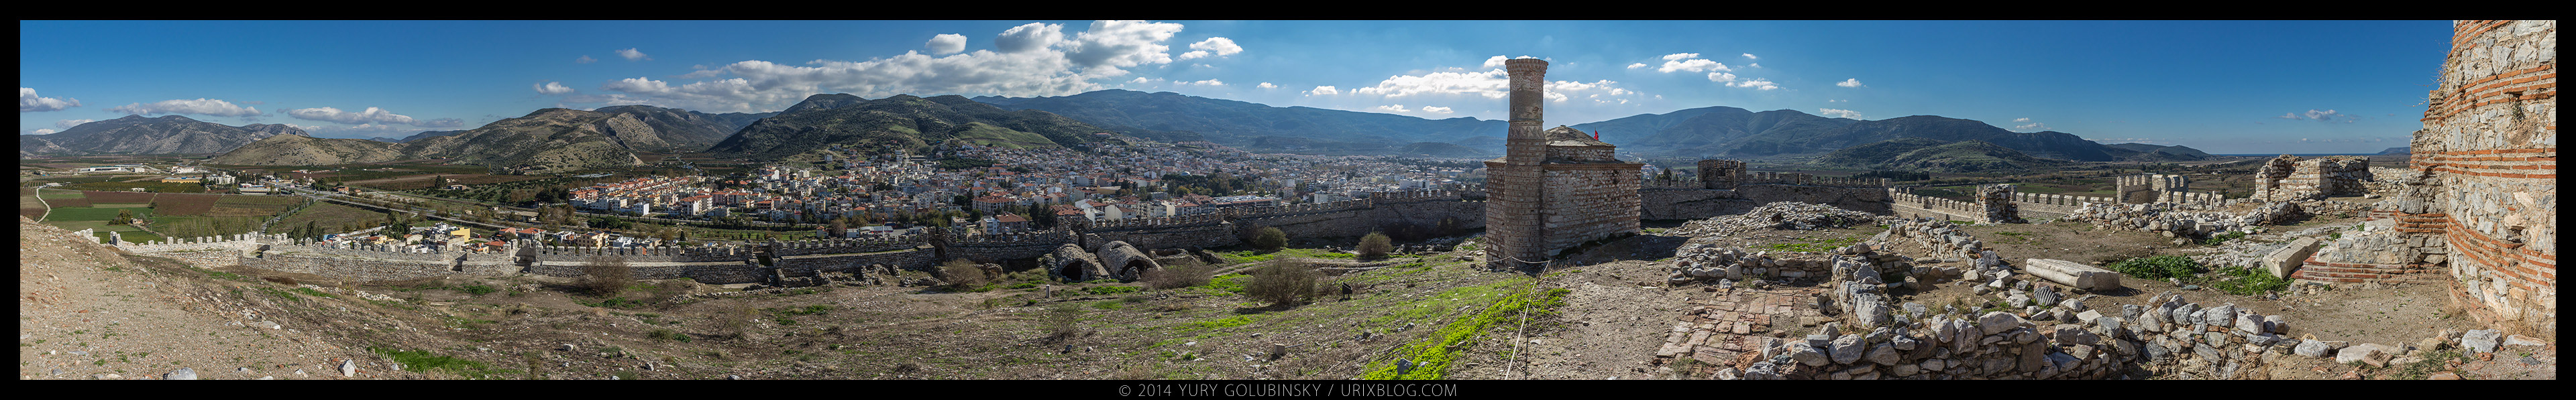 2014, Ayasuluk, fortress, castle, inside, hill, Selçuk, Izmir, Turkey, ancient, medieval, ruins, excavations, panorama